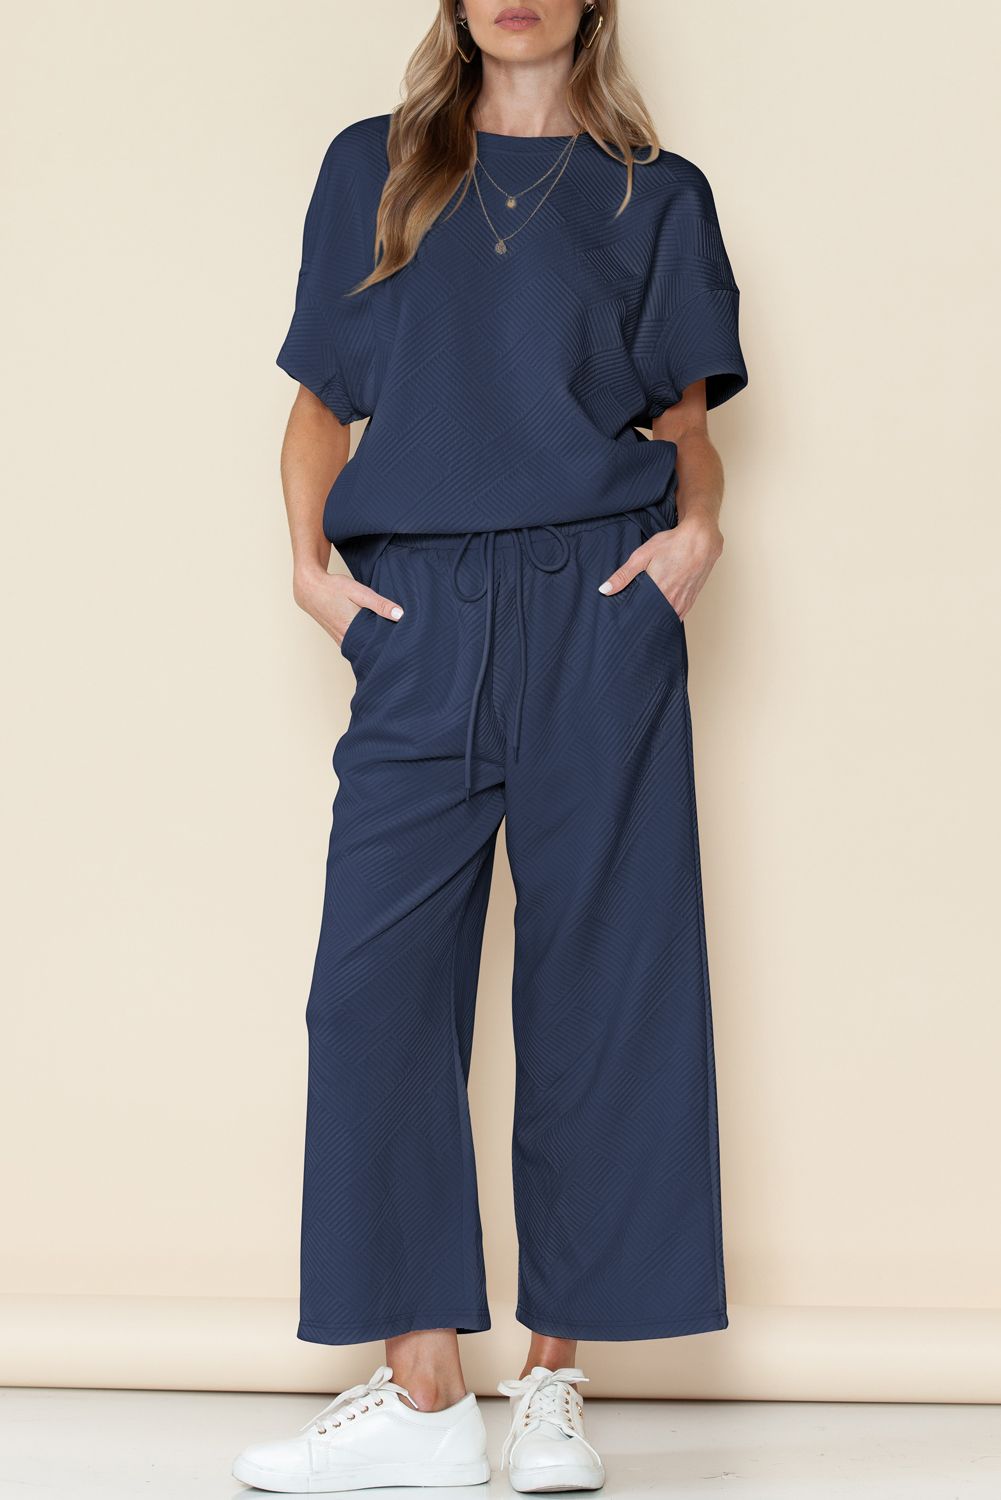 Shewin Wholesale Apparel Navy Blue Textured Loose Fit T SHIRT and Drawstring Pants Set